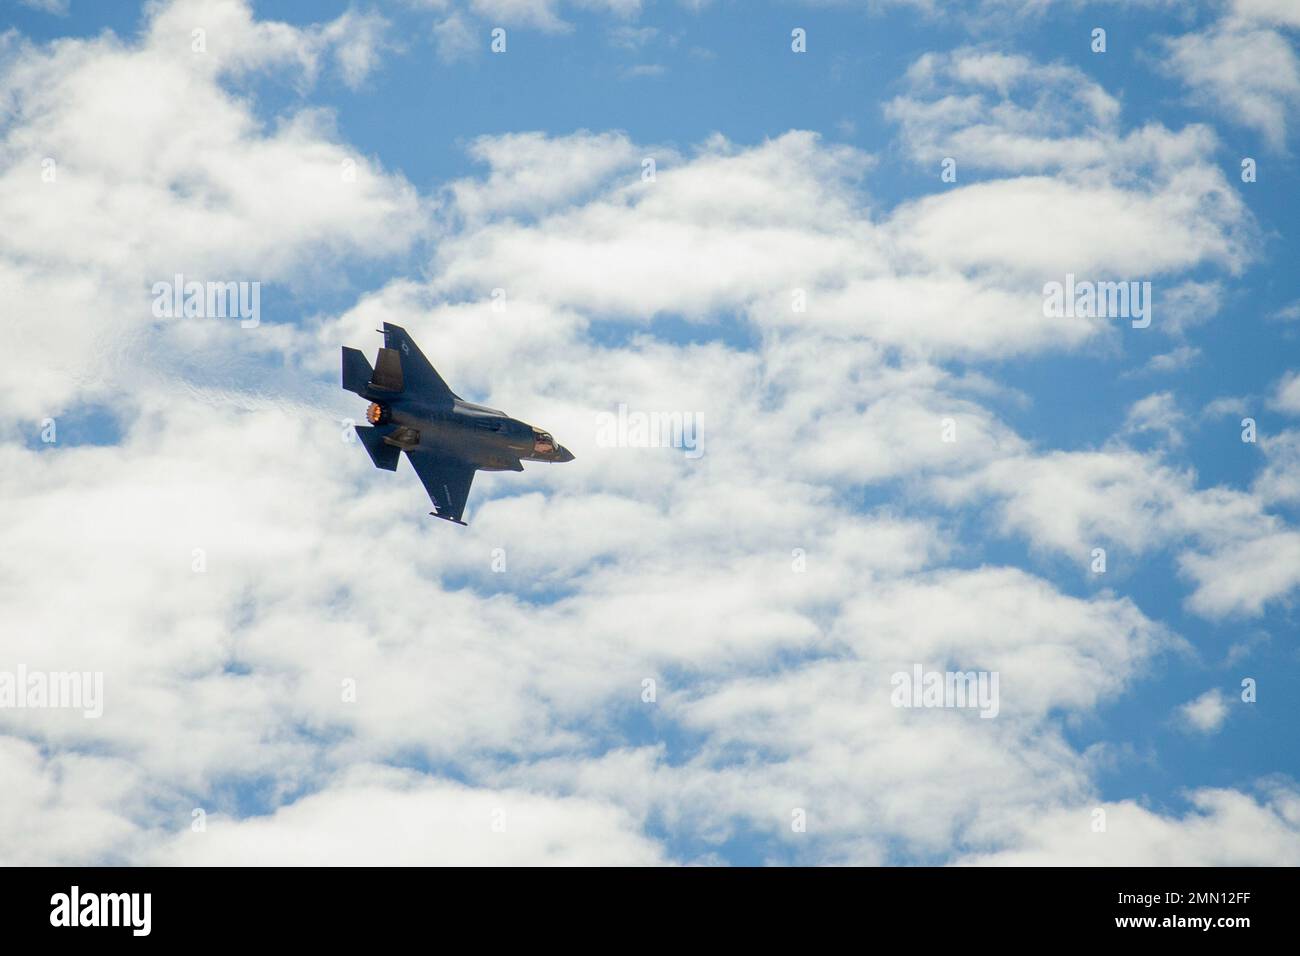 An F-35 Lightning II Hornet flies above the flight line during the Marine Air-Ground Task Force demonstration of the 2022 Marine Corps Air Station Miramar Air Show at MCAS Miramar, San Diego, California, Sept. 24, 2022. The MAGTF Demo displays the coordinated use of close-air support, artillery and infantry forces, and provides a visual representation of how the Marine Corps operates. The theme for the 2022 MCAS Miramar Air Show, “Marines Fight, Evolve and Win,” reflects the Marine Corps’ ongoing modernization efforts to prepare for future conflicts. Stock Photo